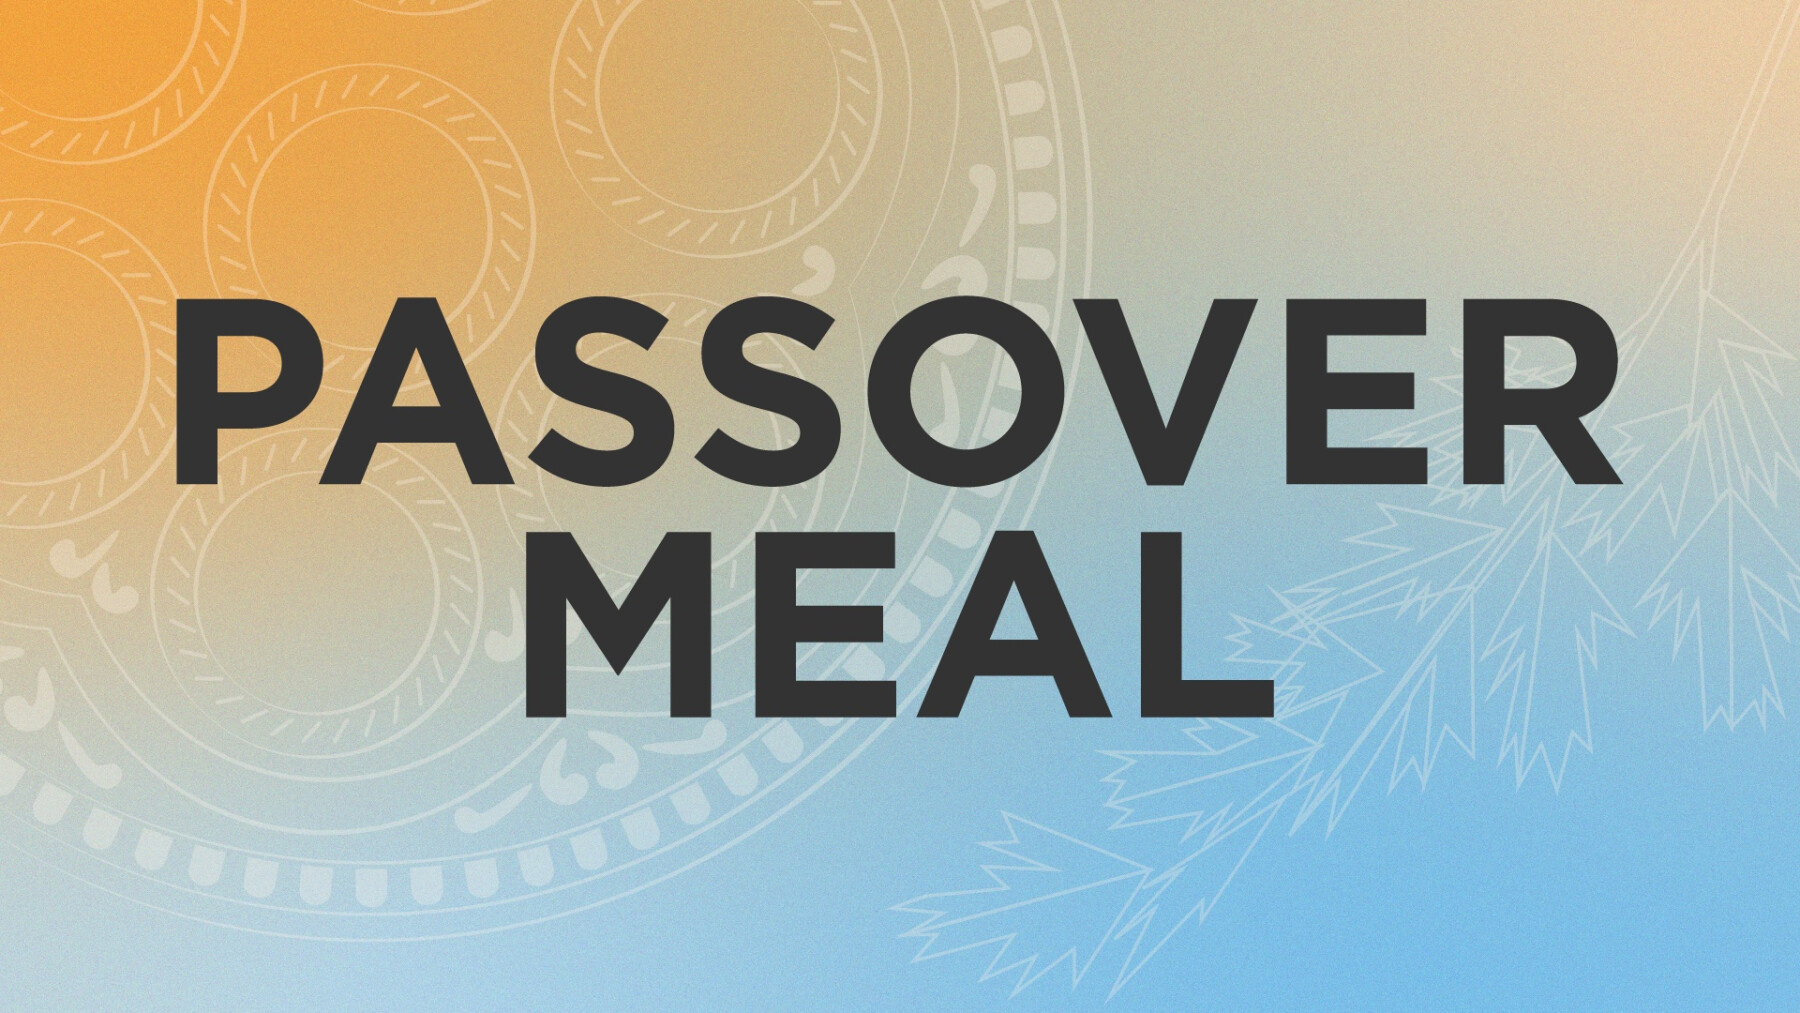 Passover Meal